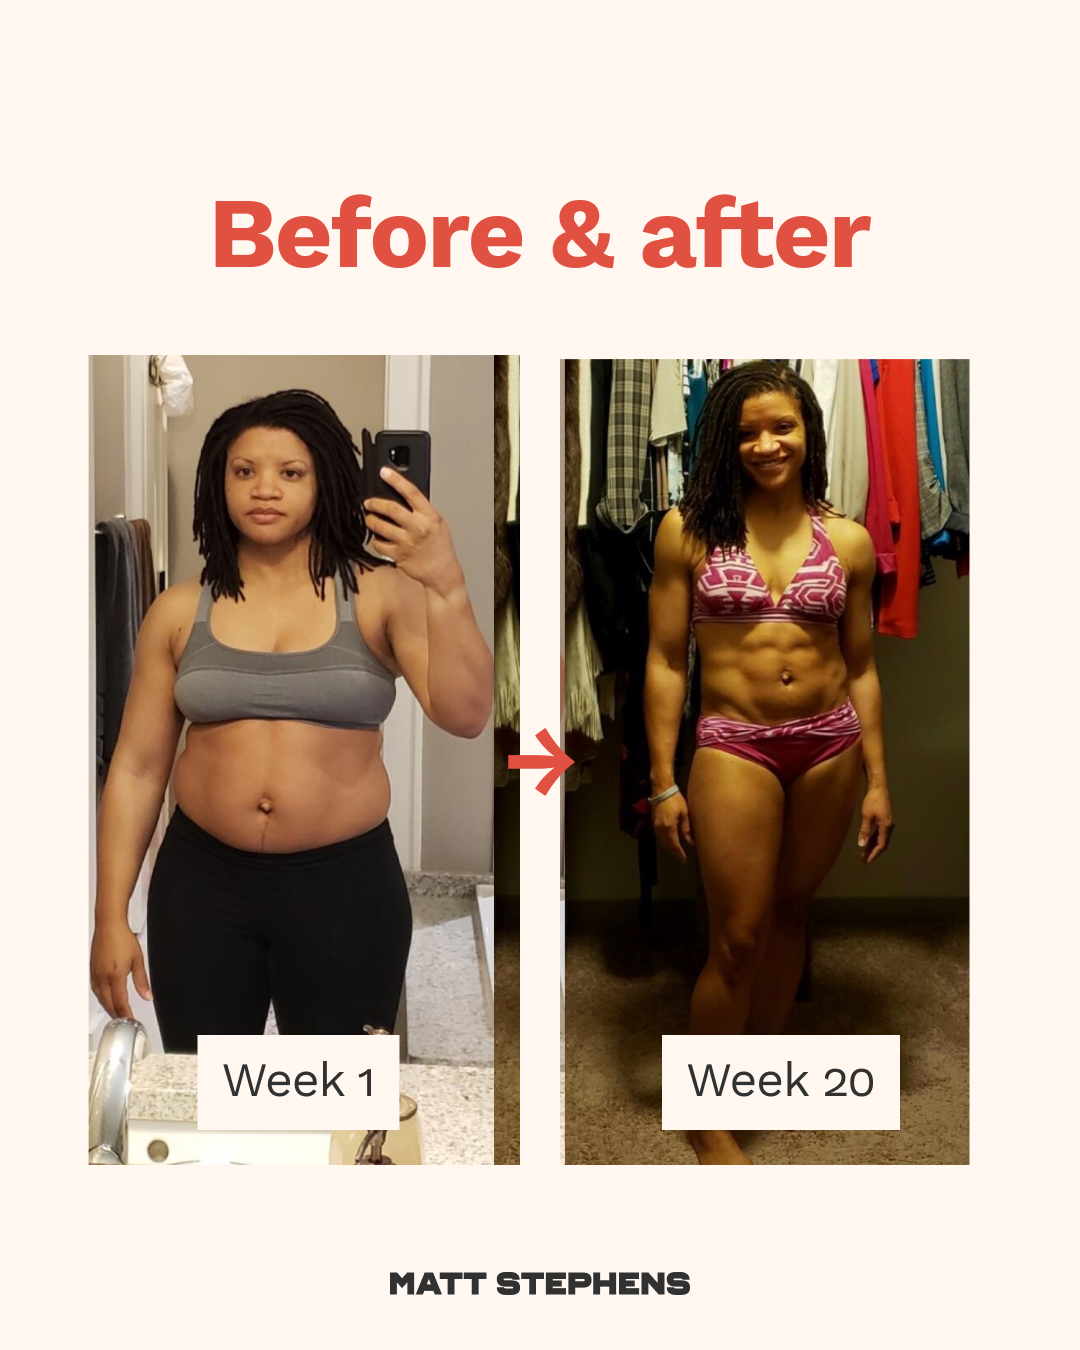 Kim, 38, Advertisement account manager, This mom of 2 struggled to lose fat after her second child. Once we got her results in the 60-Day Challenge, she stuck around for longer and this is what we accomplished!